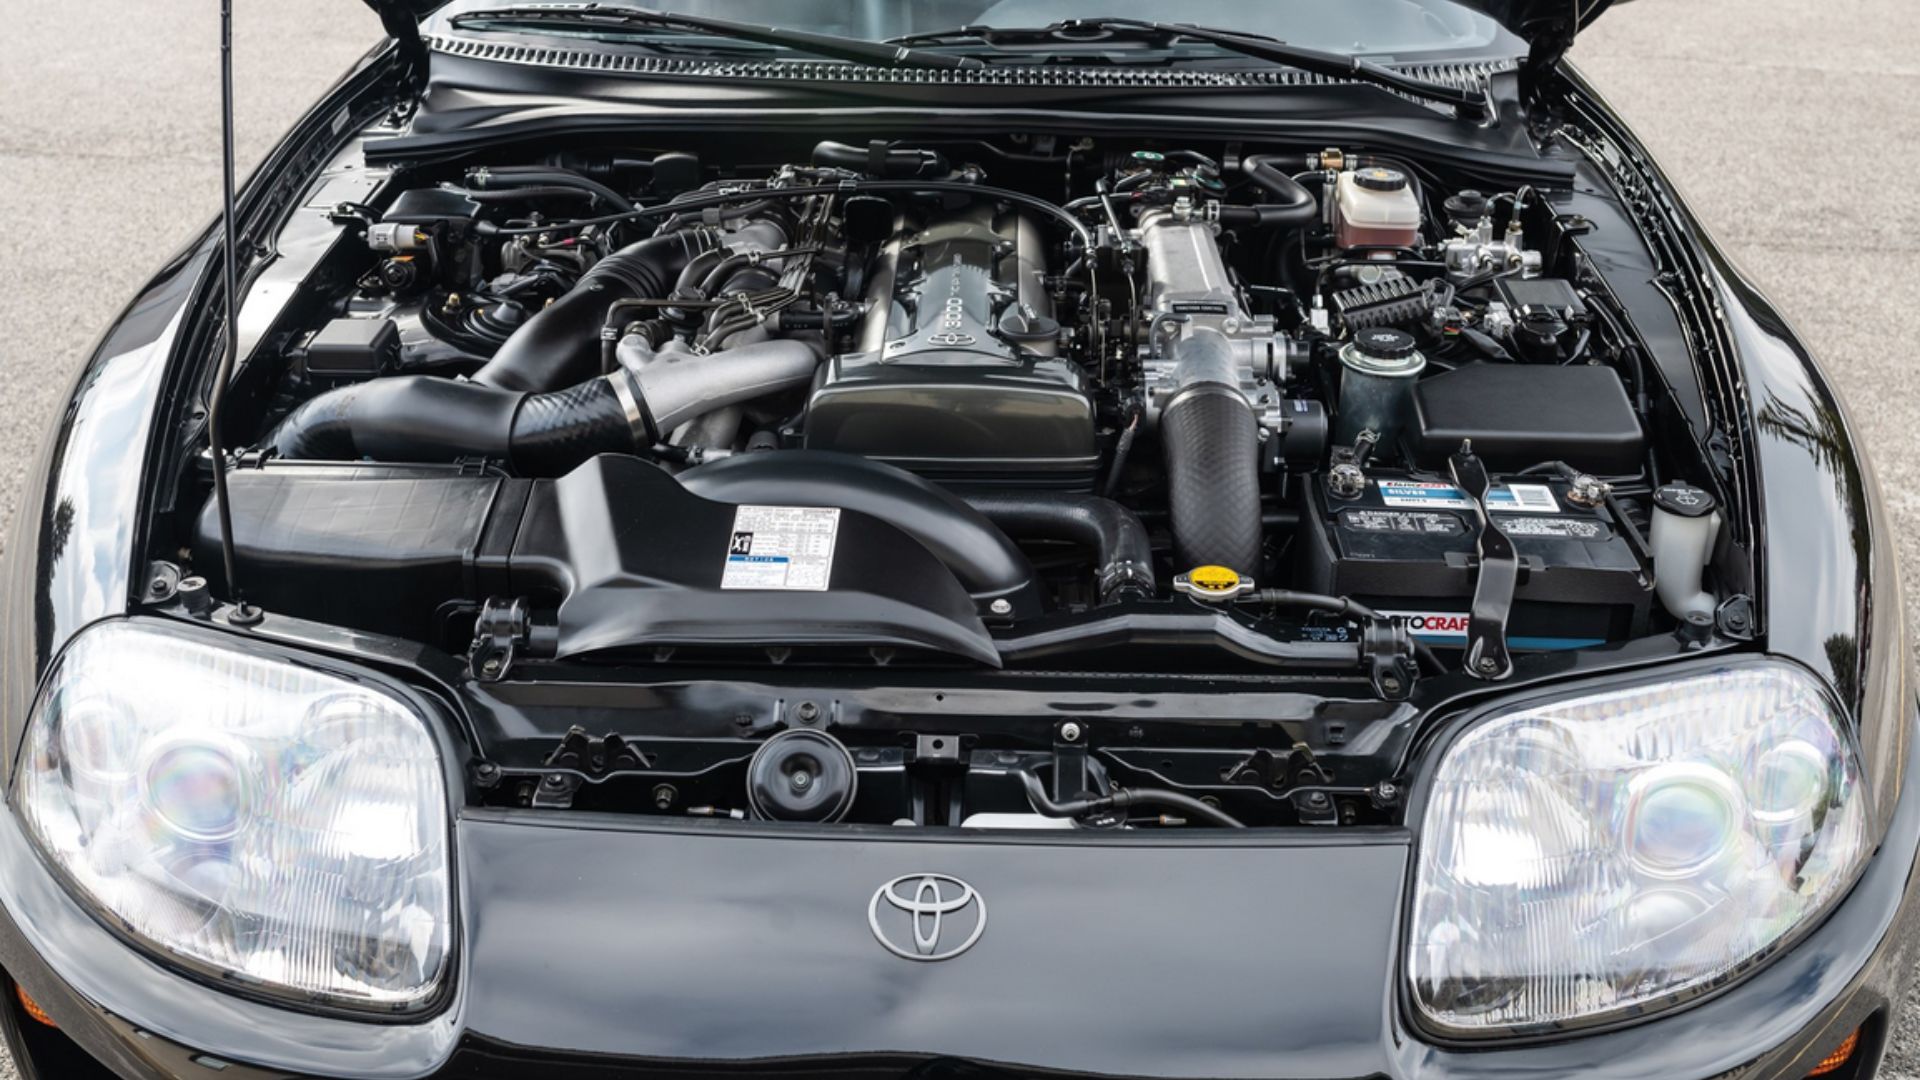 1993 Toyota Supra Turbo Auction Meets Expectations 